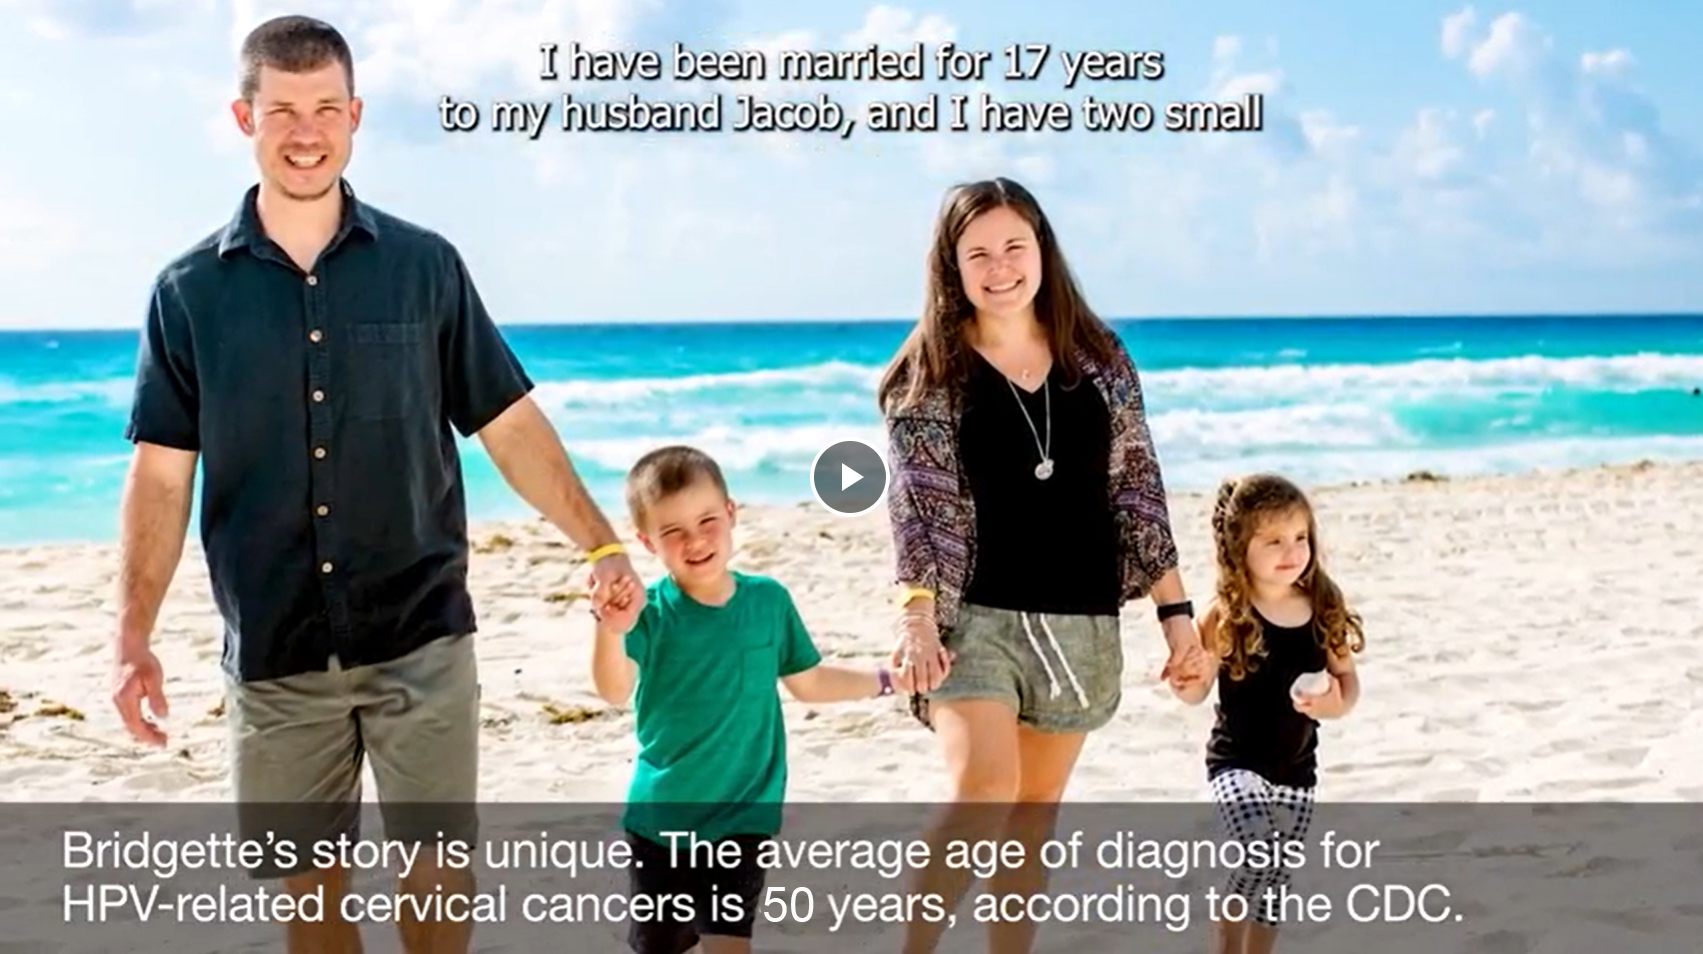 Video: Learn About the Cancer Story of a Patient Diagnosed With an HPV-related Cervical Cancer